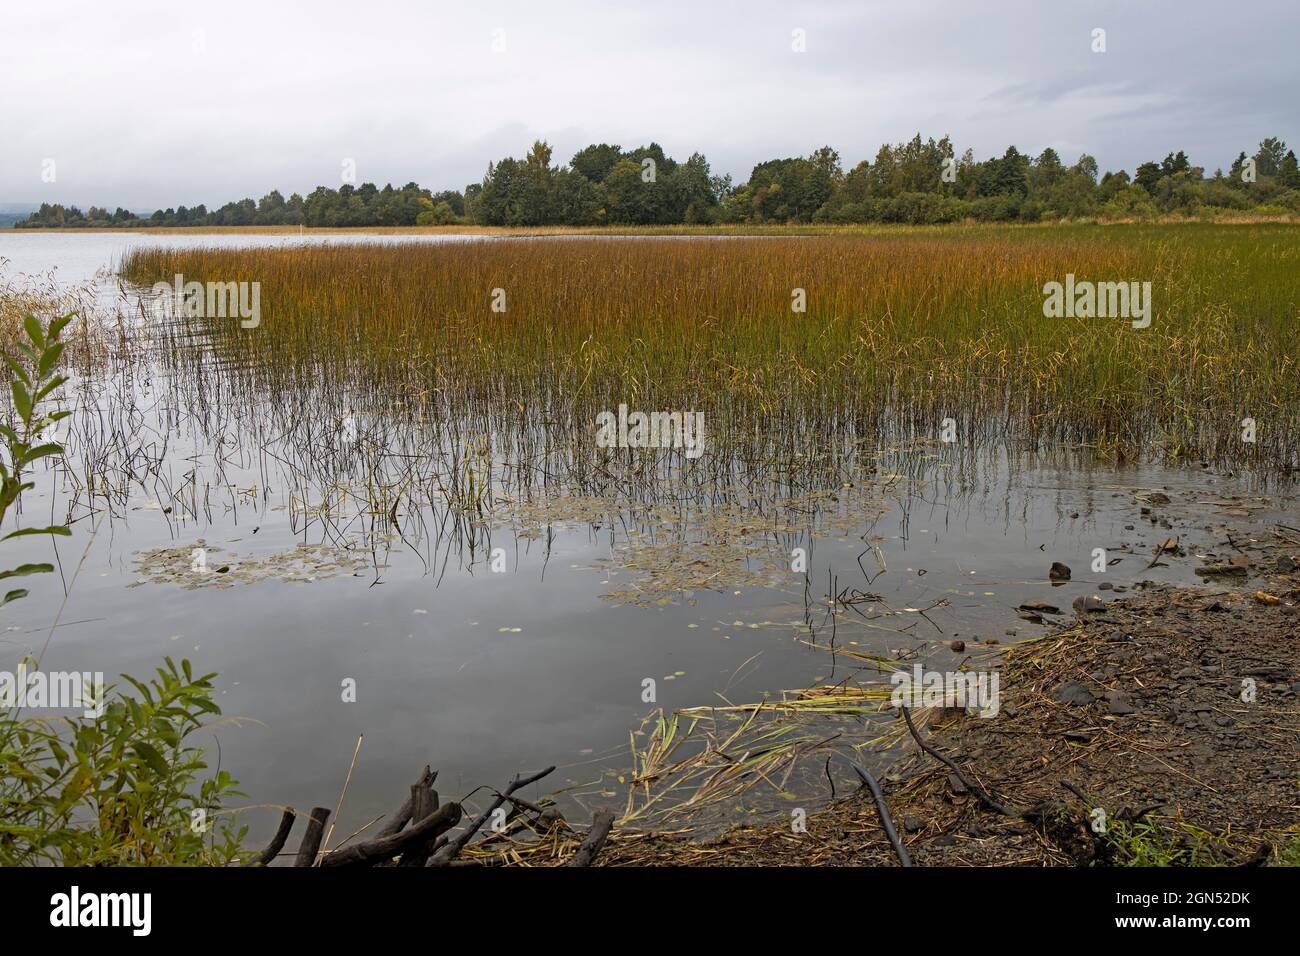 View from the island of Kizhi to the reeds of Lake Ladoga in heavy rain Stock Photo